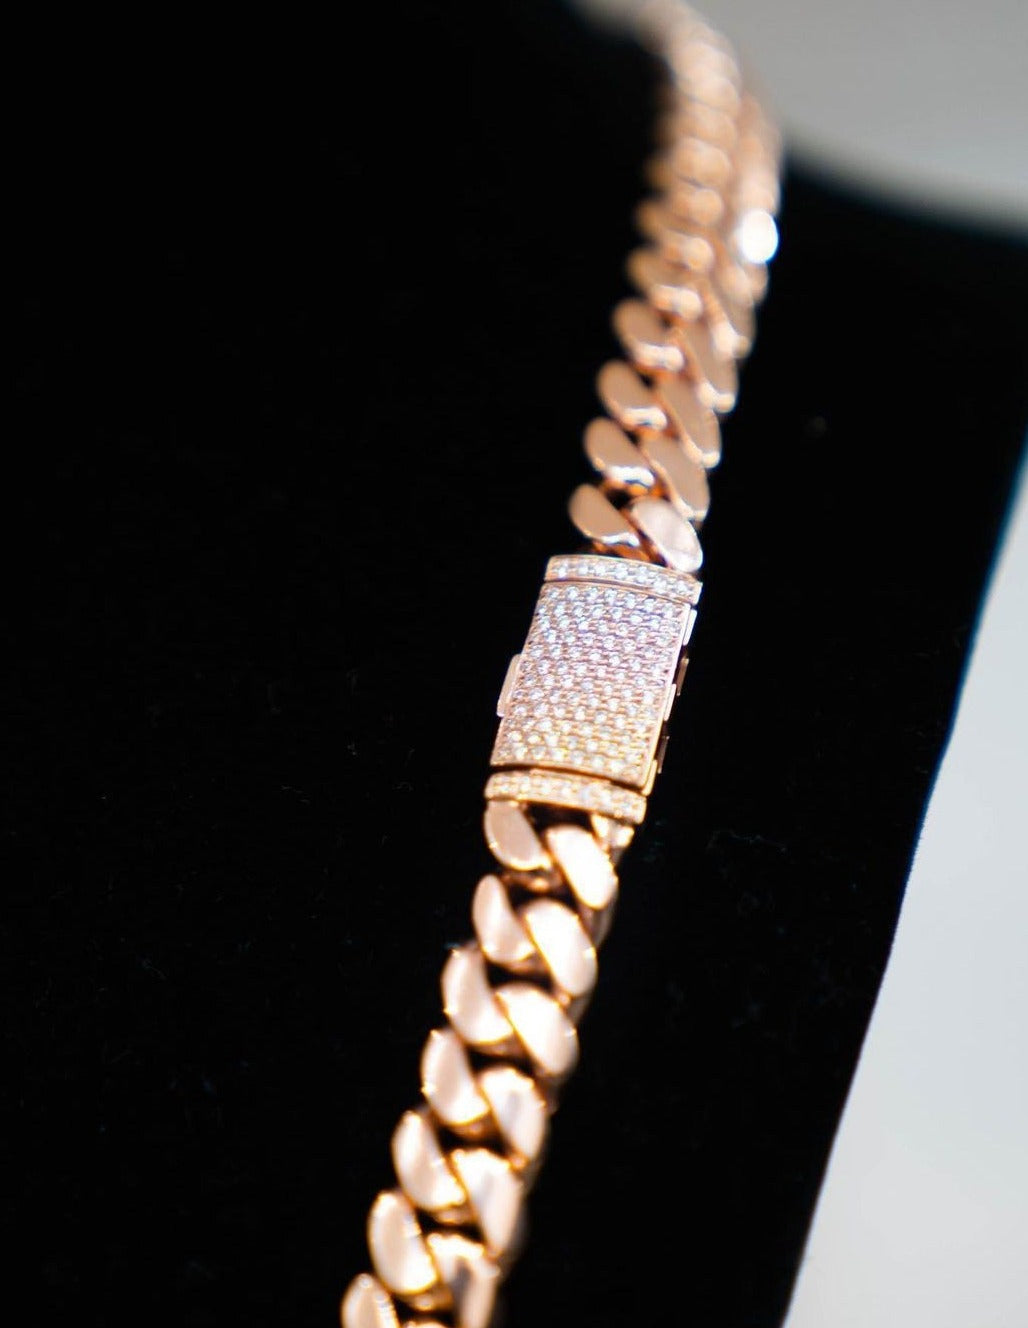 RARE PRINCE by CARAT SUTRA | Solid 12mm Miami Cuban Link Chain with Iced Lock | 22kt Gold Micron Plated on 925 Sterling Silver Chain with AAA+ Quality Swarovski Diamonds | Men's Jewelry | With Certificate of Authenticity and 925 Hallmark - caratsutra